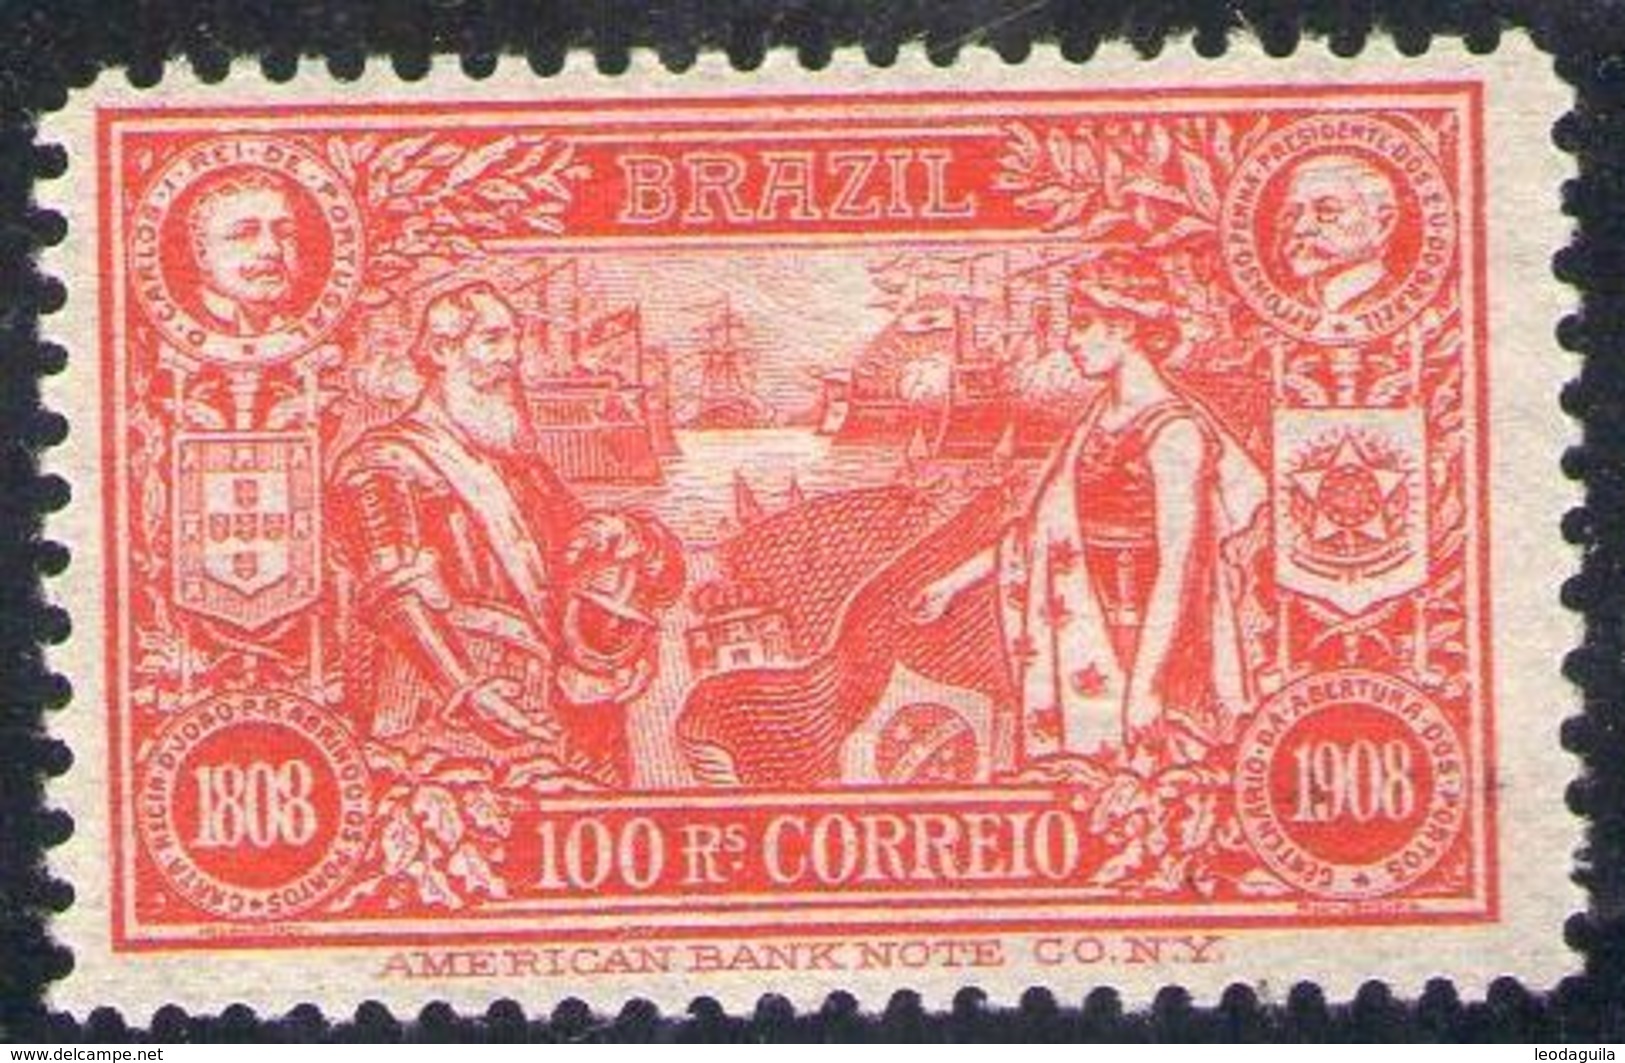 BRAZIL # 190  -  CENTENARY  OF THE OPENING OF PORTS   -  MH  - 1908 - Nuovi